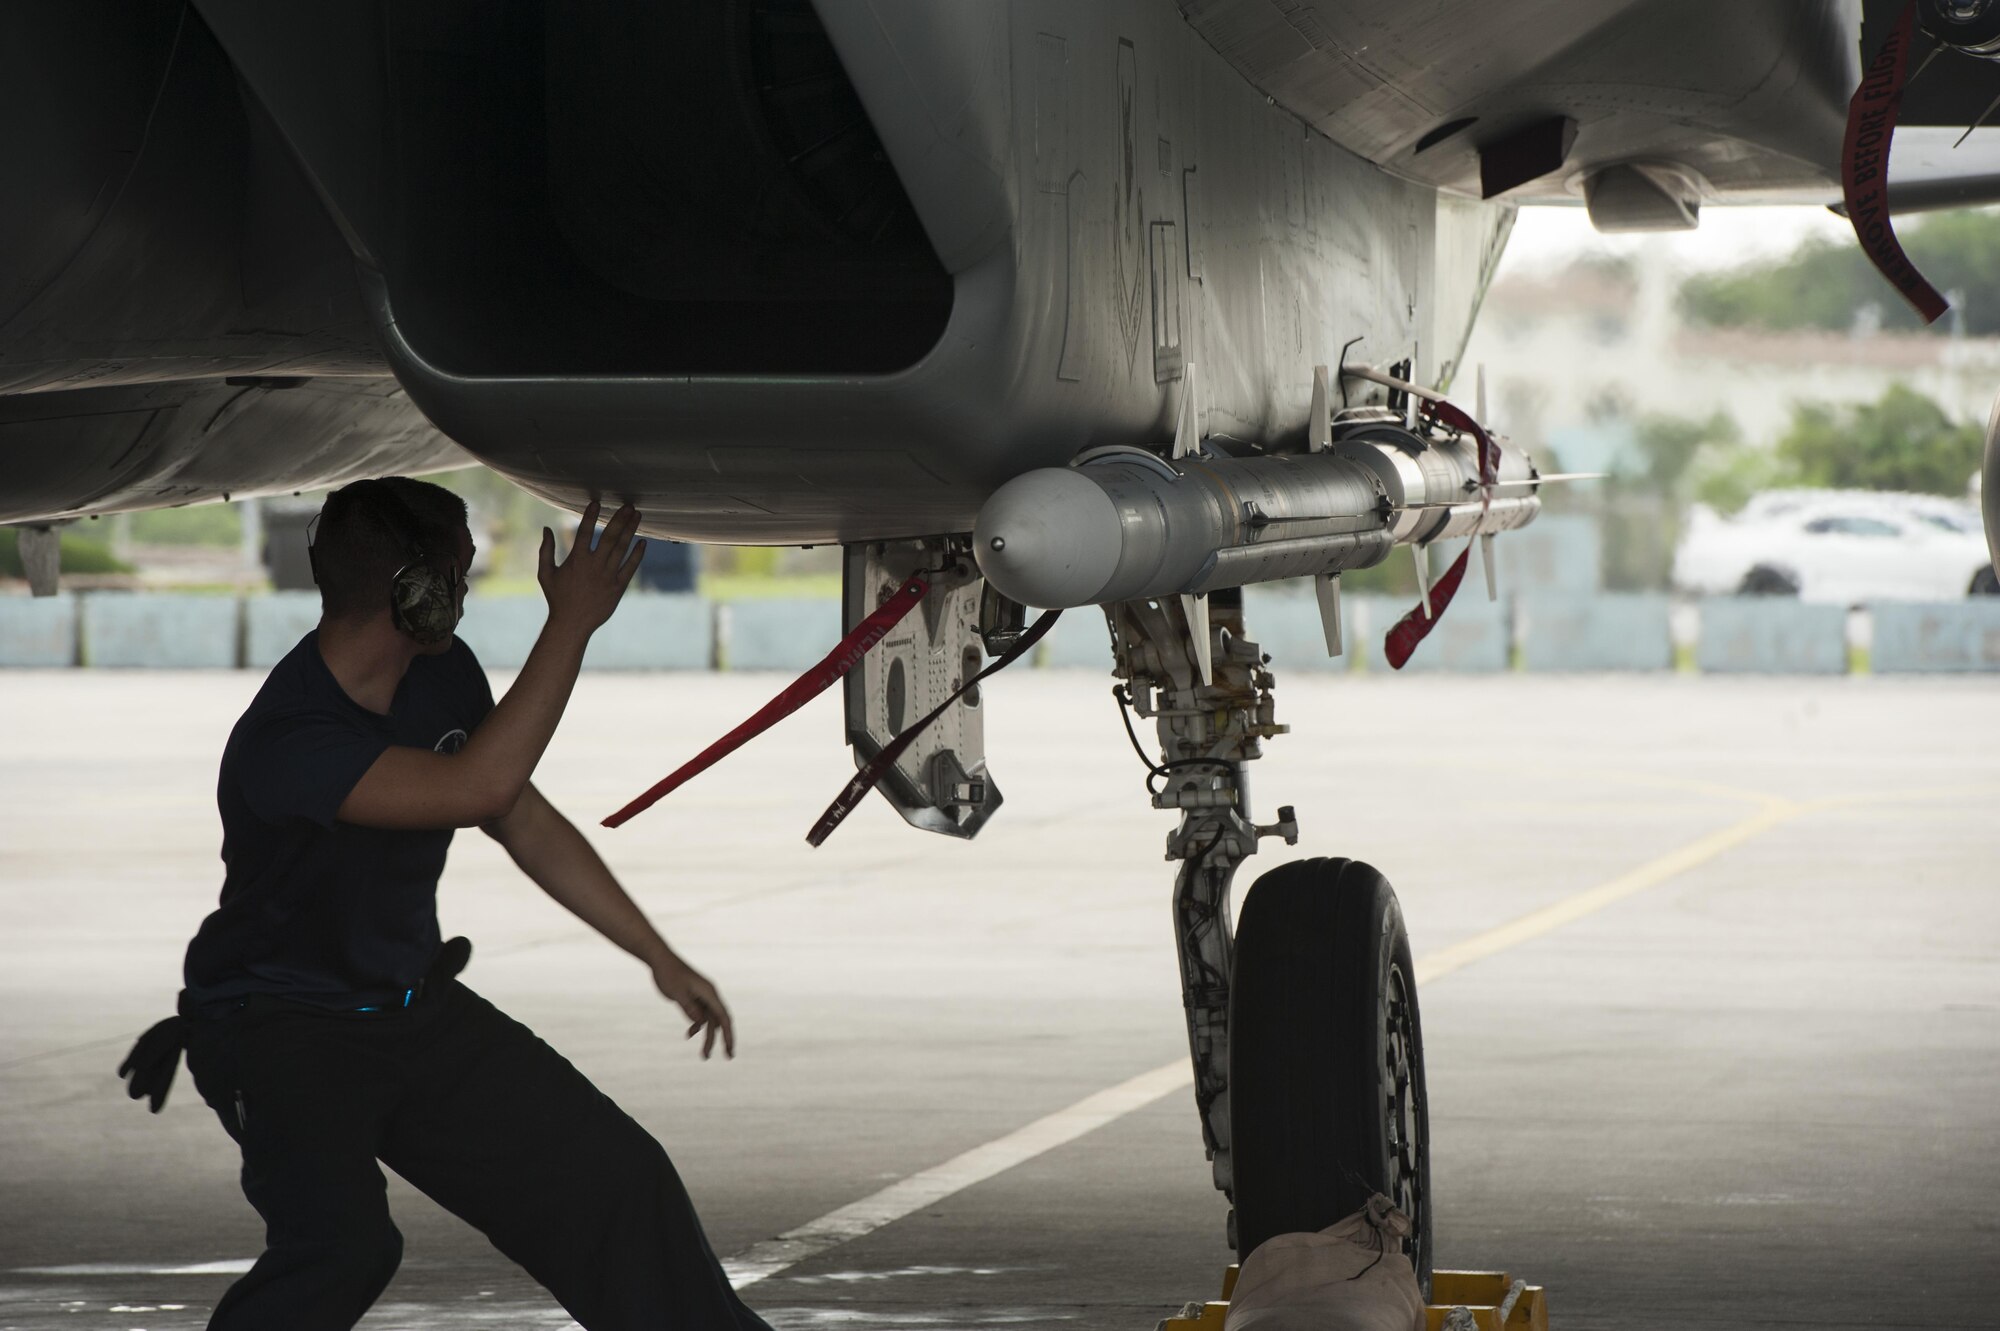 U.S. Air Force Senior Airman Zachary Sutphin, 44th Fighter Squadron crew chief, disengages safety pins during a pre-flight check March 18, 2016, at Kadena Air Base, Japan. It is with the combined efforts of maintainers and pilots that Kadena can provide regional security throughout the Indo-Asia-Pacific region. (U.S. Air Force photo by Airman 1st Class Lynette M. Rolen)